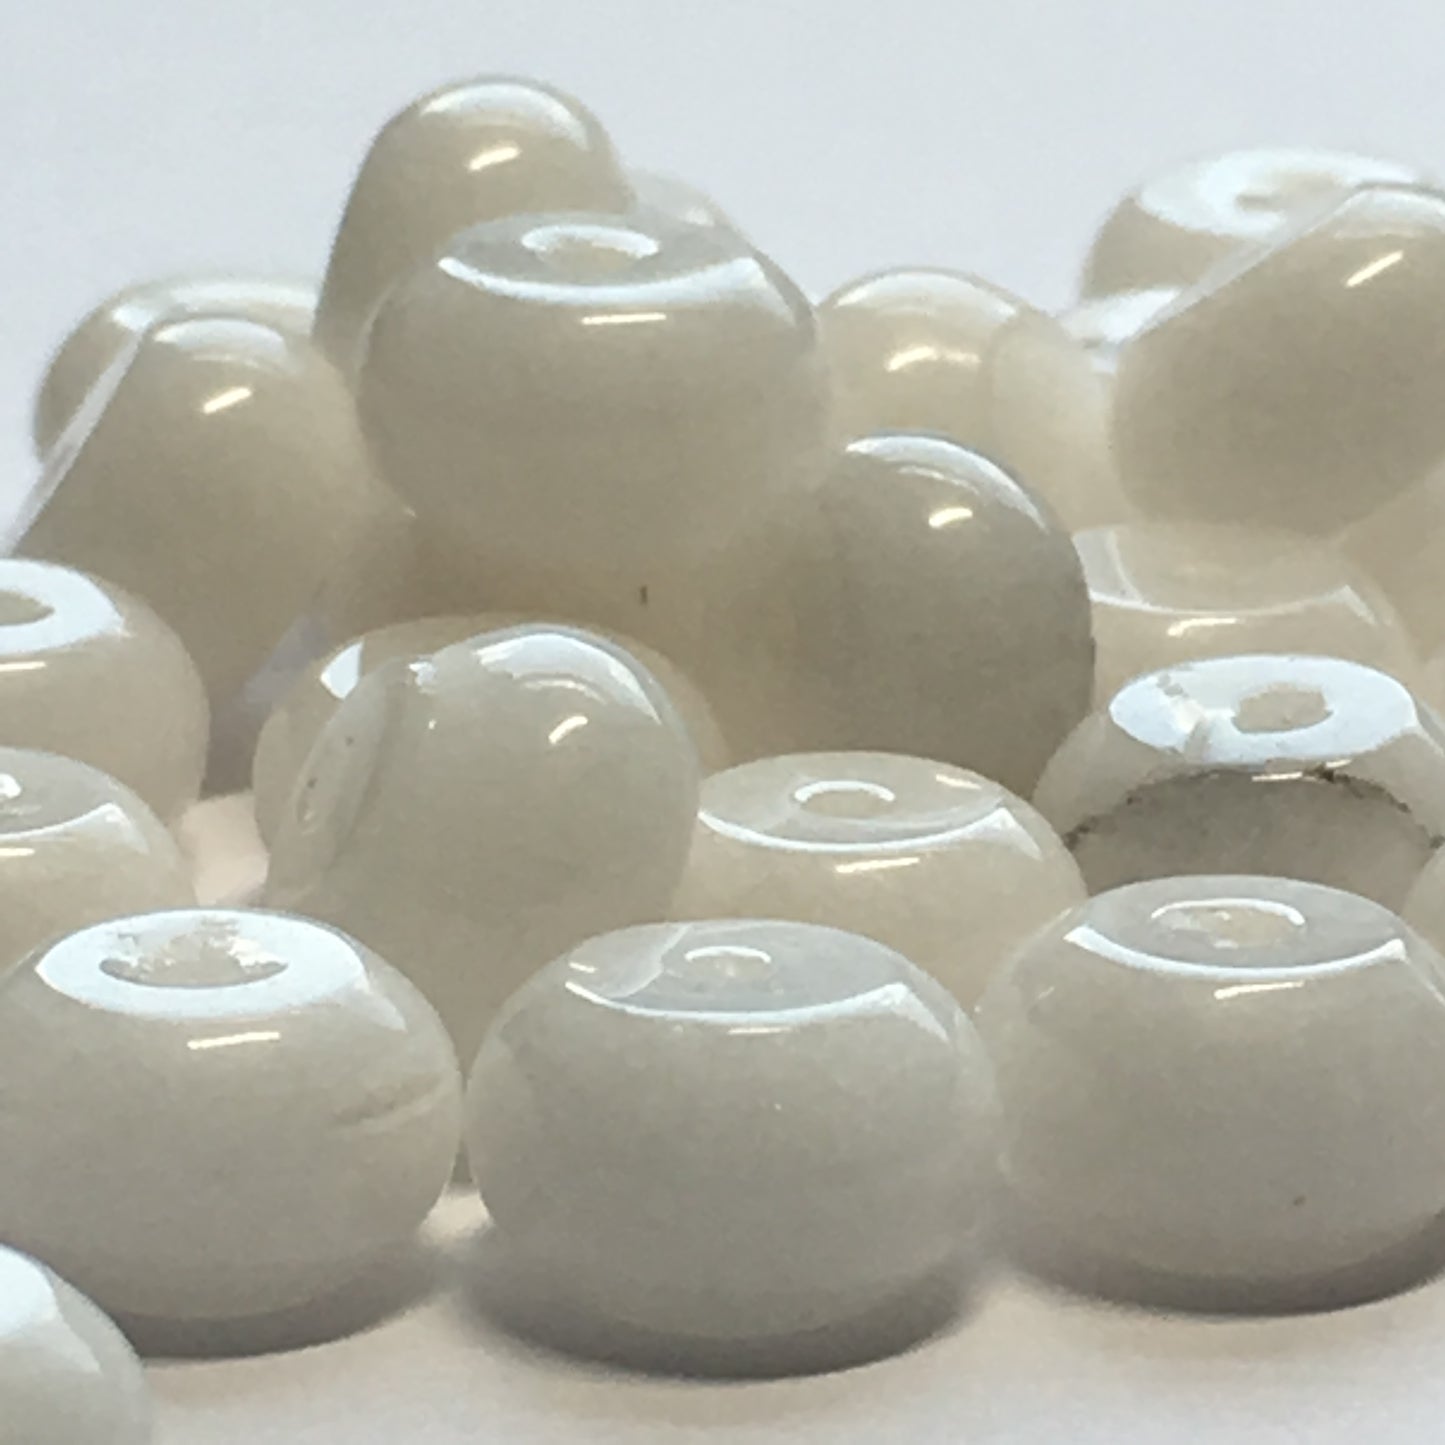 White Stone Rondelle Beads, 5 x 8 mm, 33 Beads